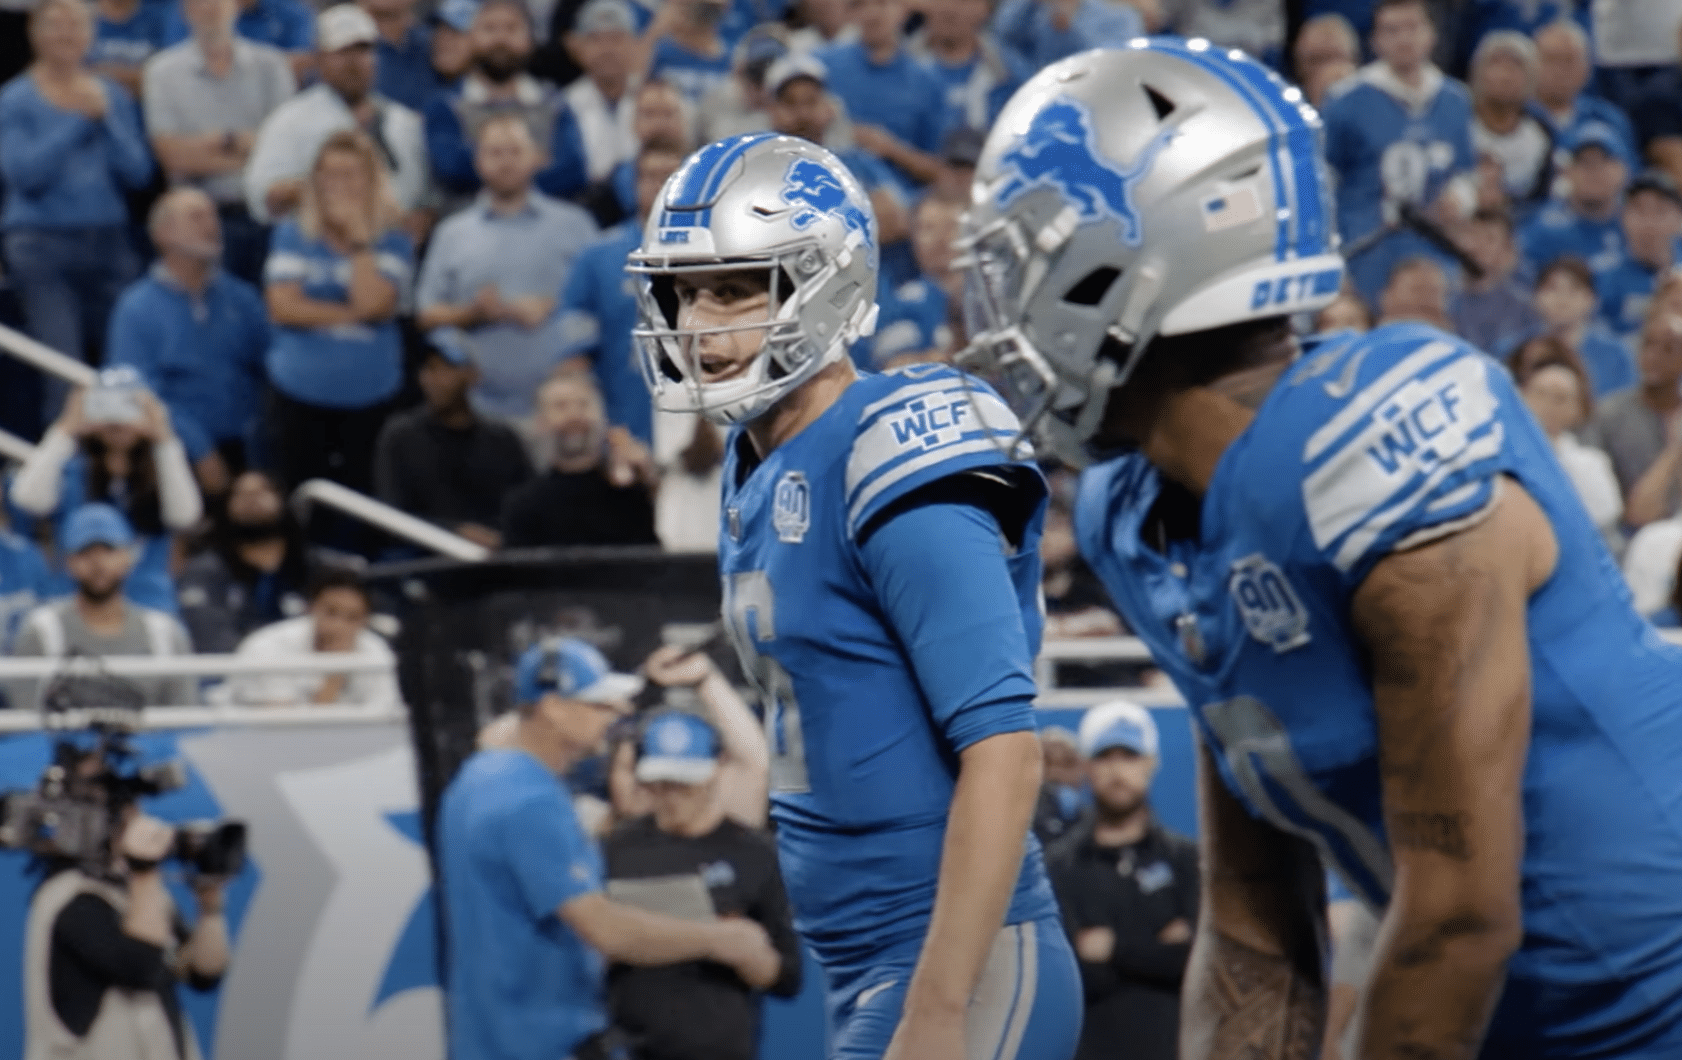 Detroit Lions starting offense Is Jared Goff An MVP Candidate Detroit Lions PFF Grades vs. Raiders Jared Goff may have to wait